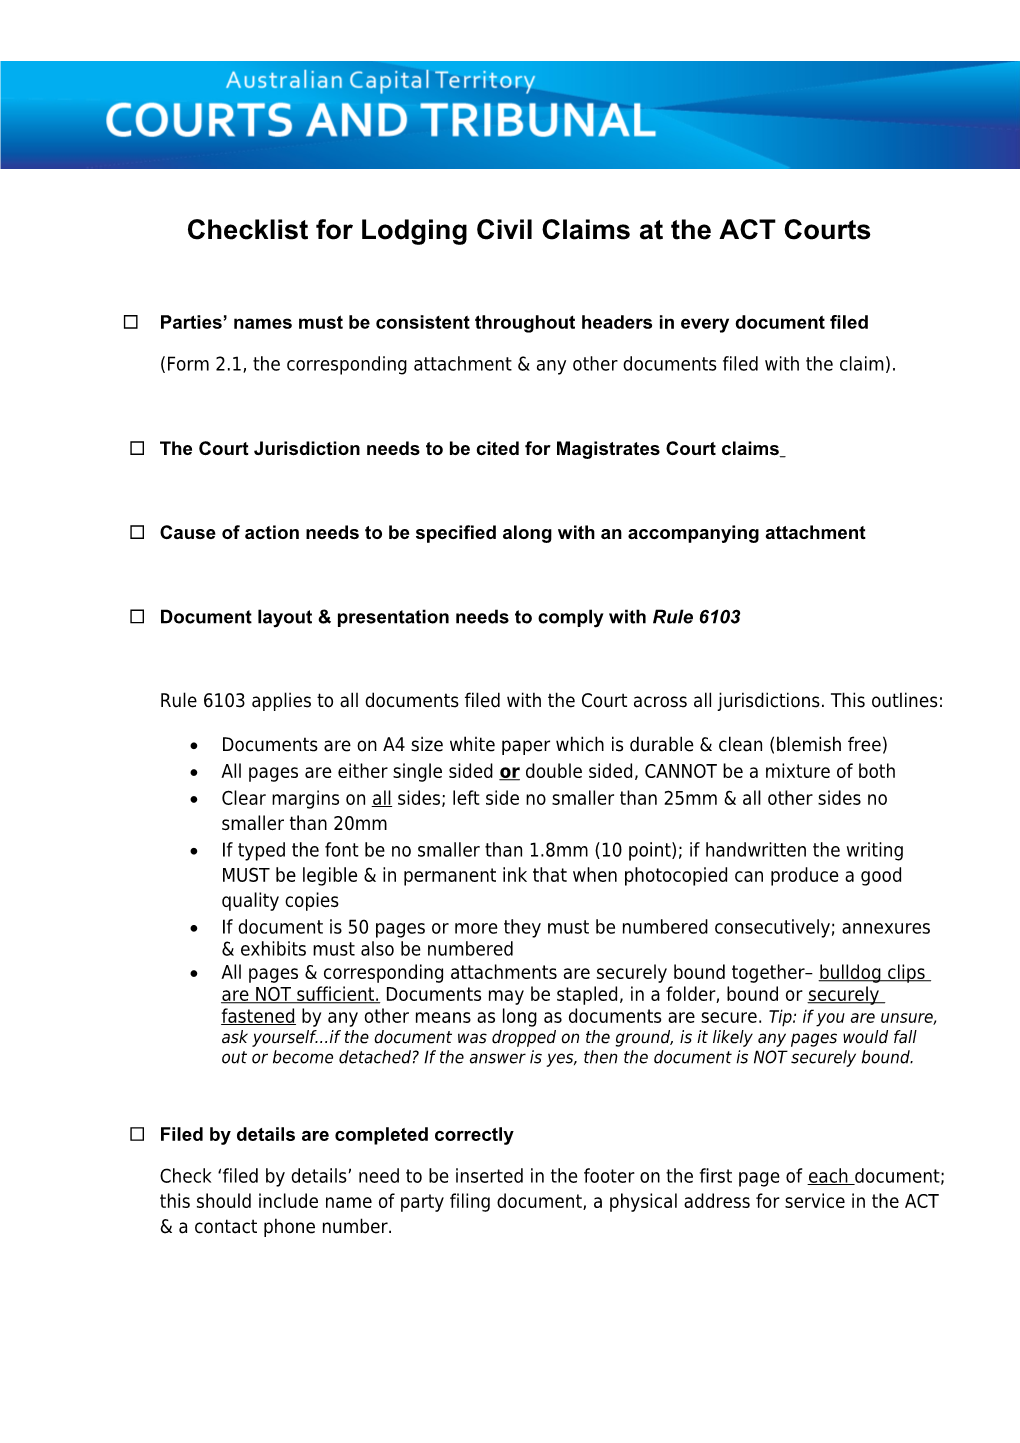 Checklist for Lodging Civil Claims at the ACT Courts